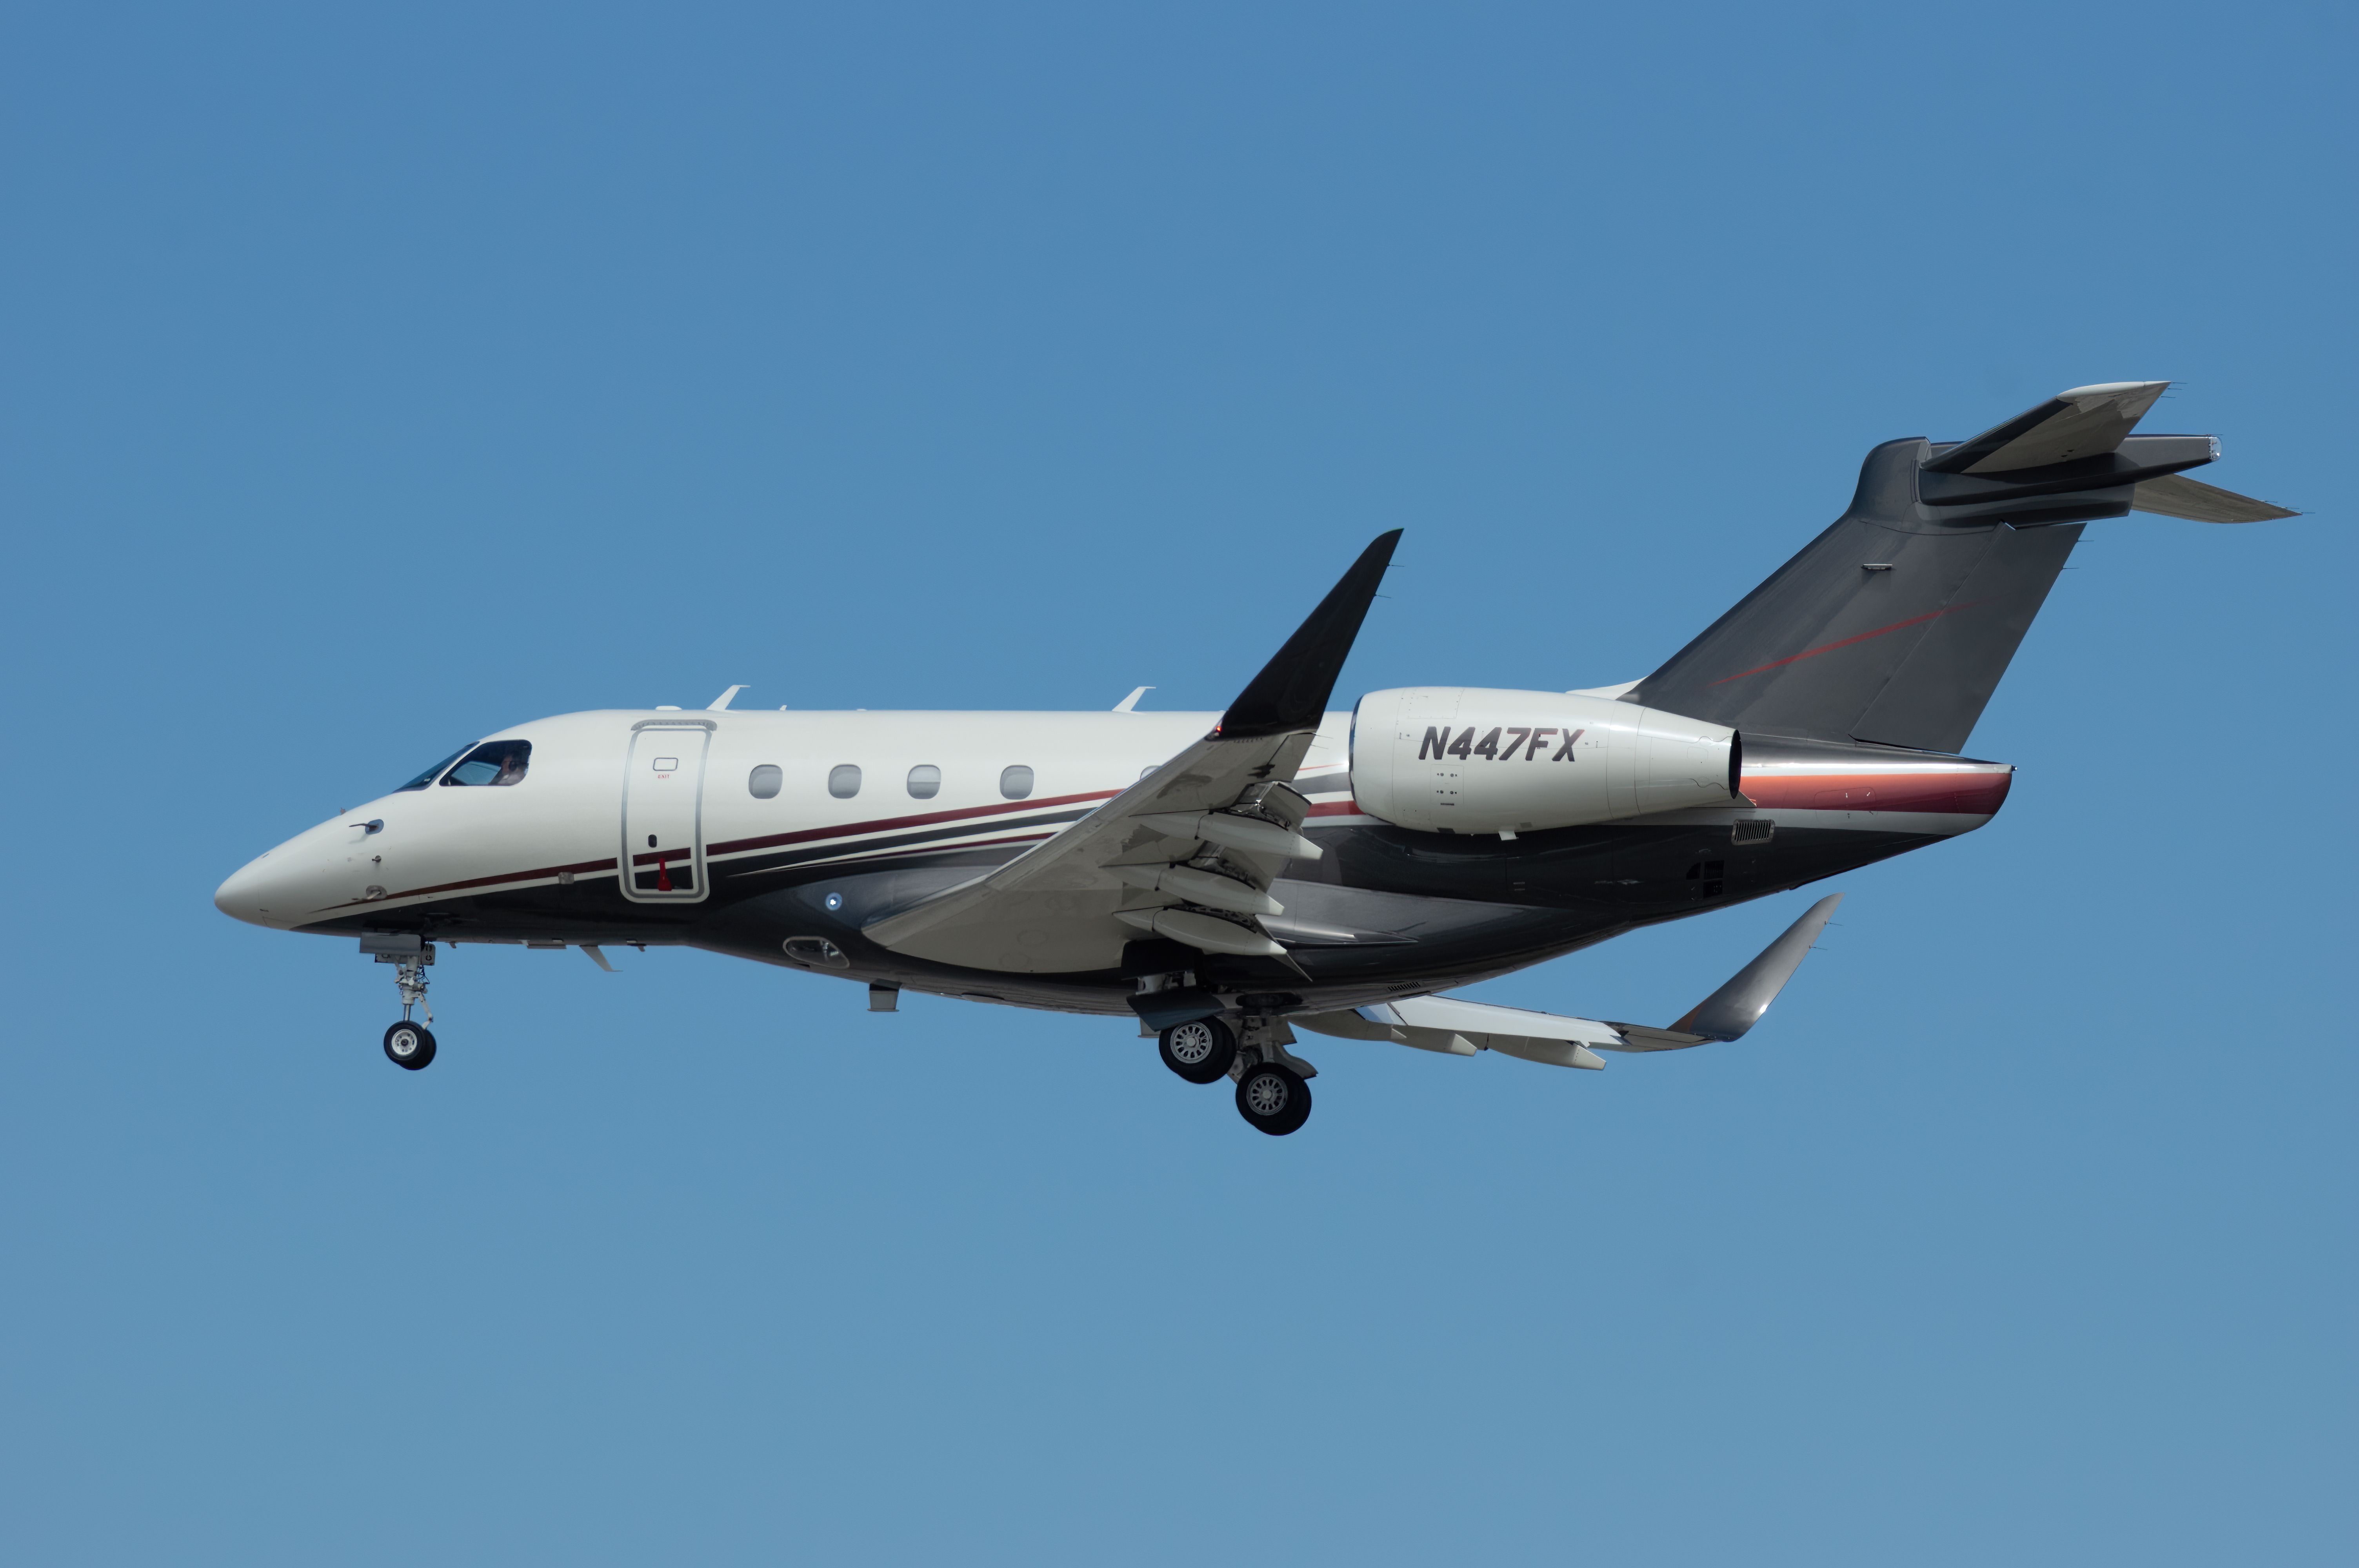 Embraer Praetor 500 jet with registration N447FX shown on final approach into LAX, Los Angeles International Airport